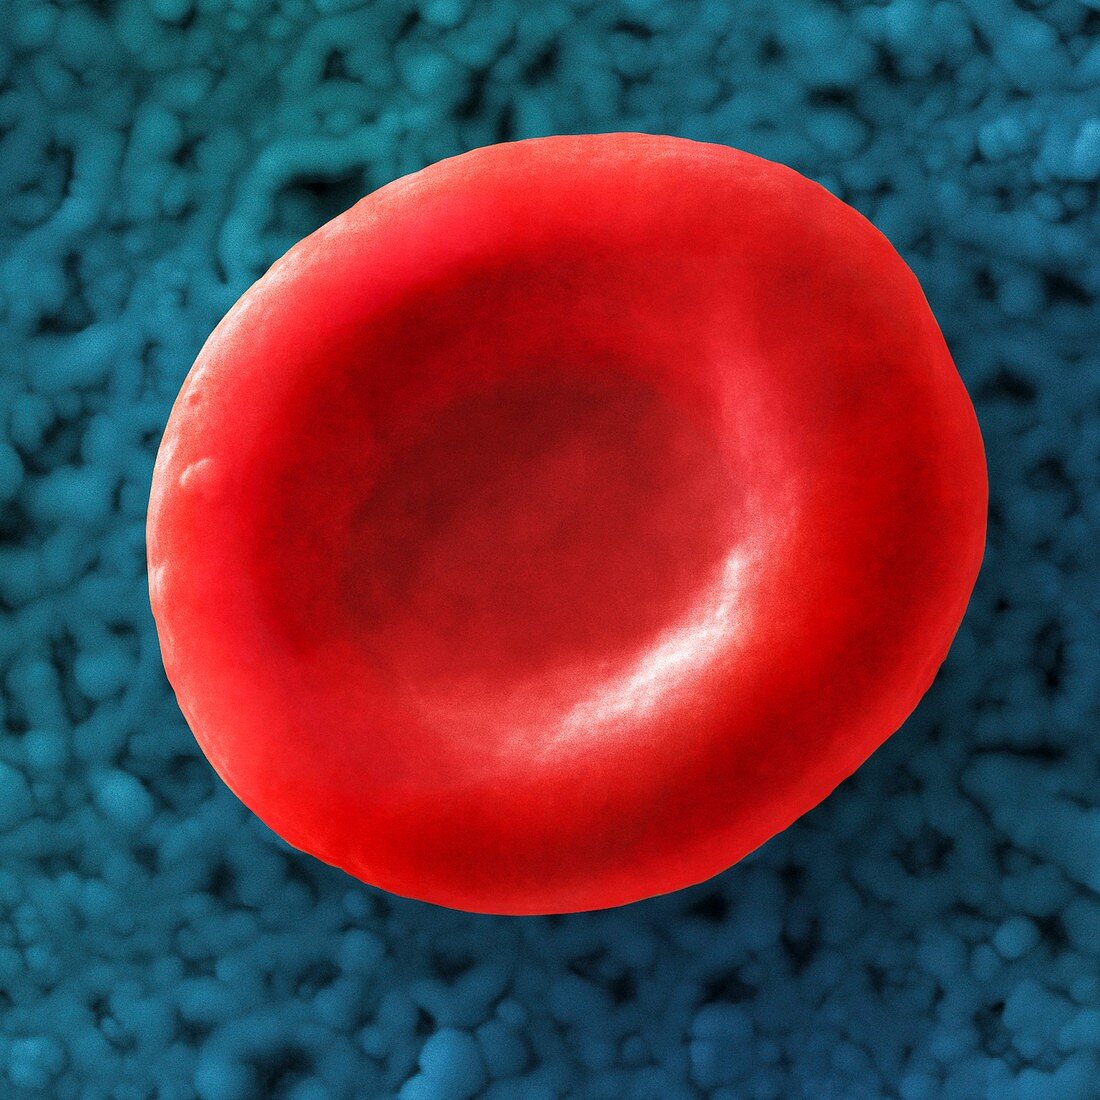 Red blood cell,SEM